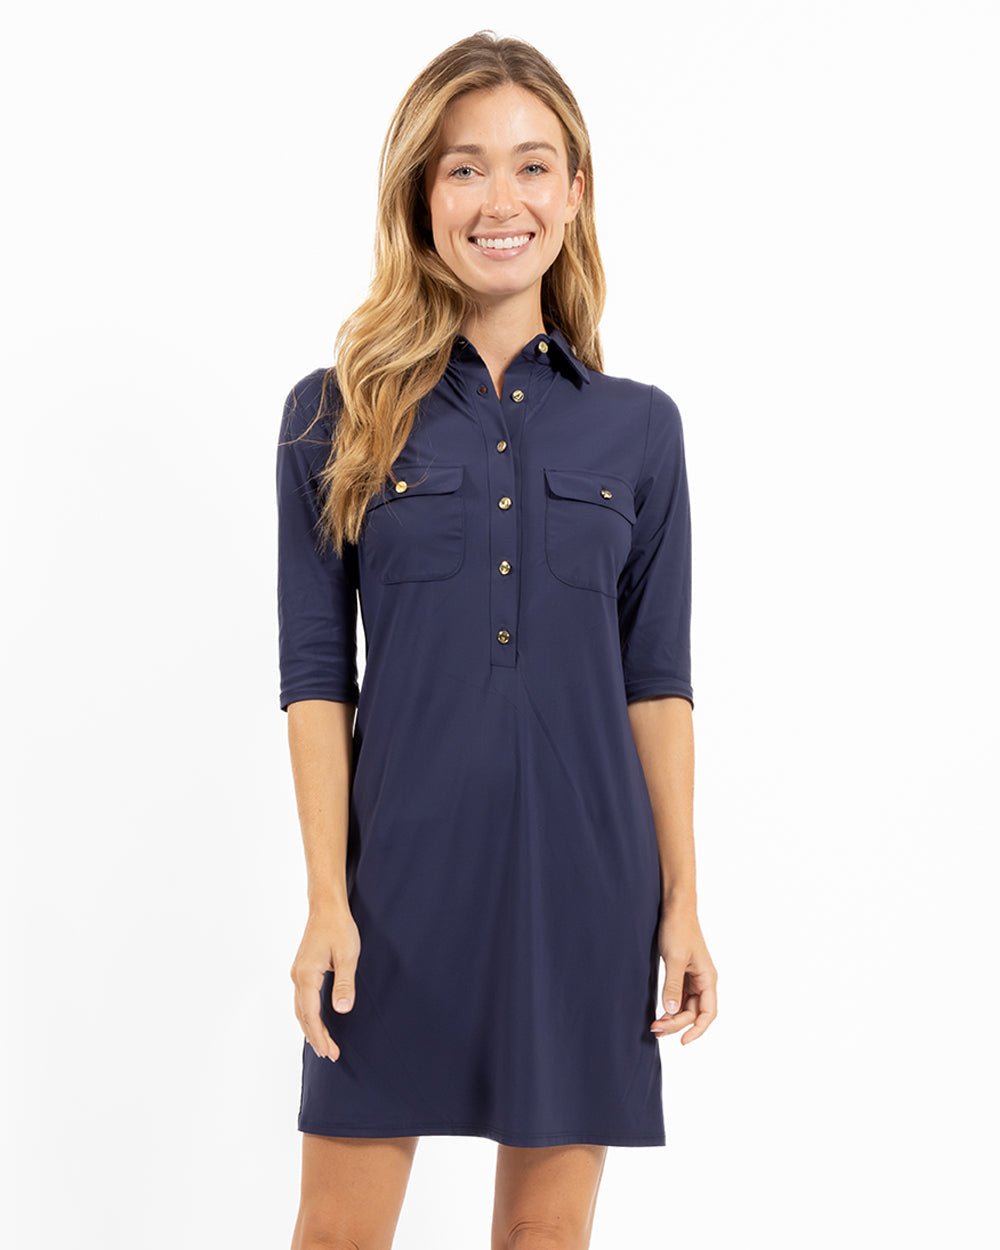 Jude Connally - Sloane Dress in Jude Cloth: Navy w/Gold Buttons - Shorely Chic Boutique